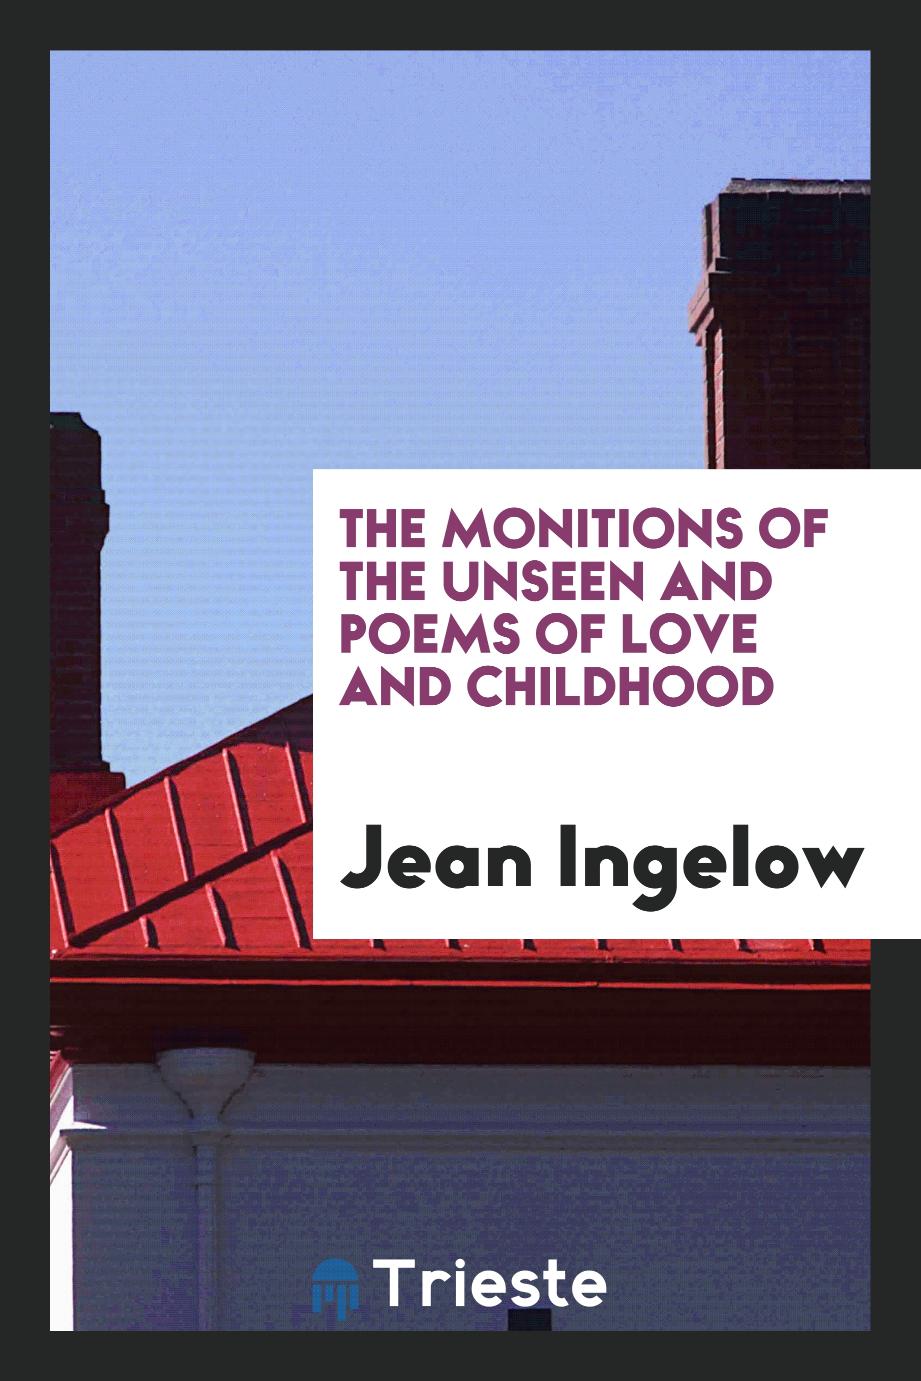 The monitions of the unseen and poems of love and childhood